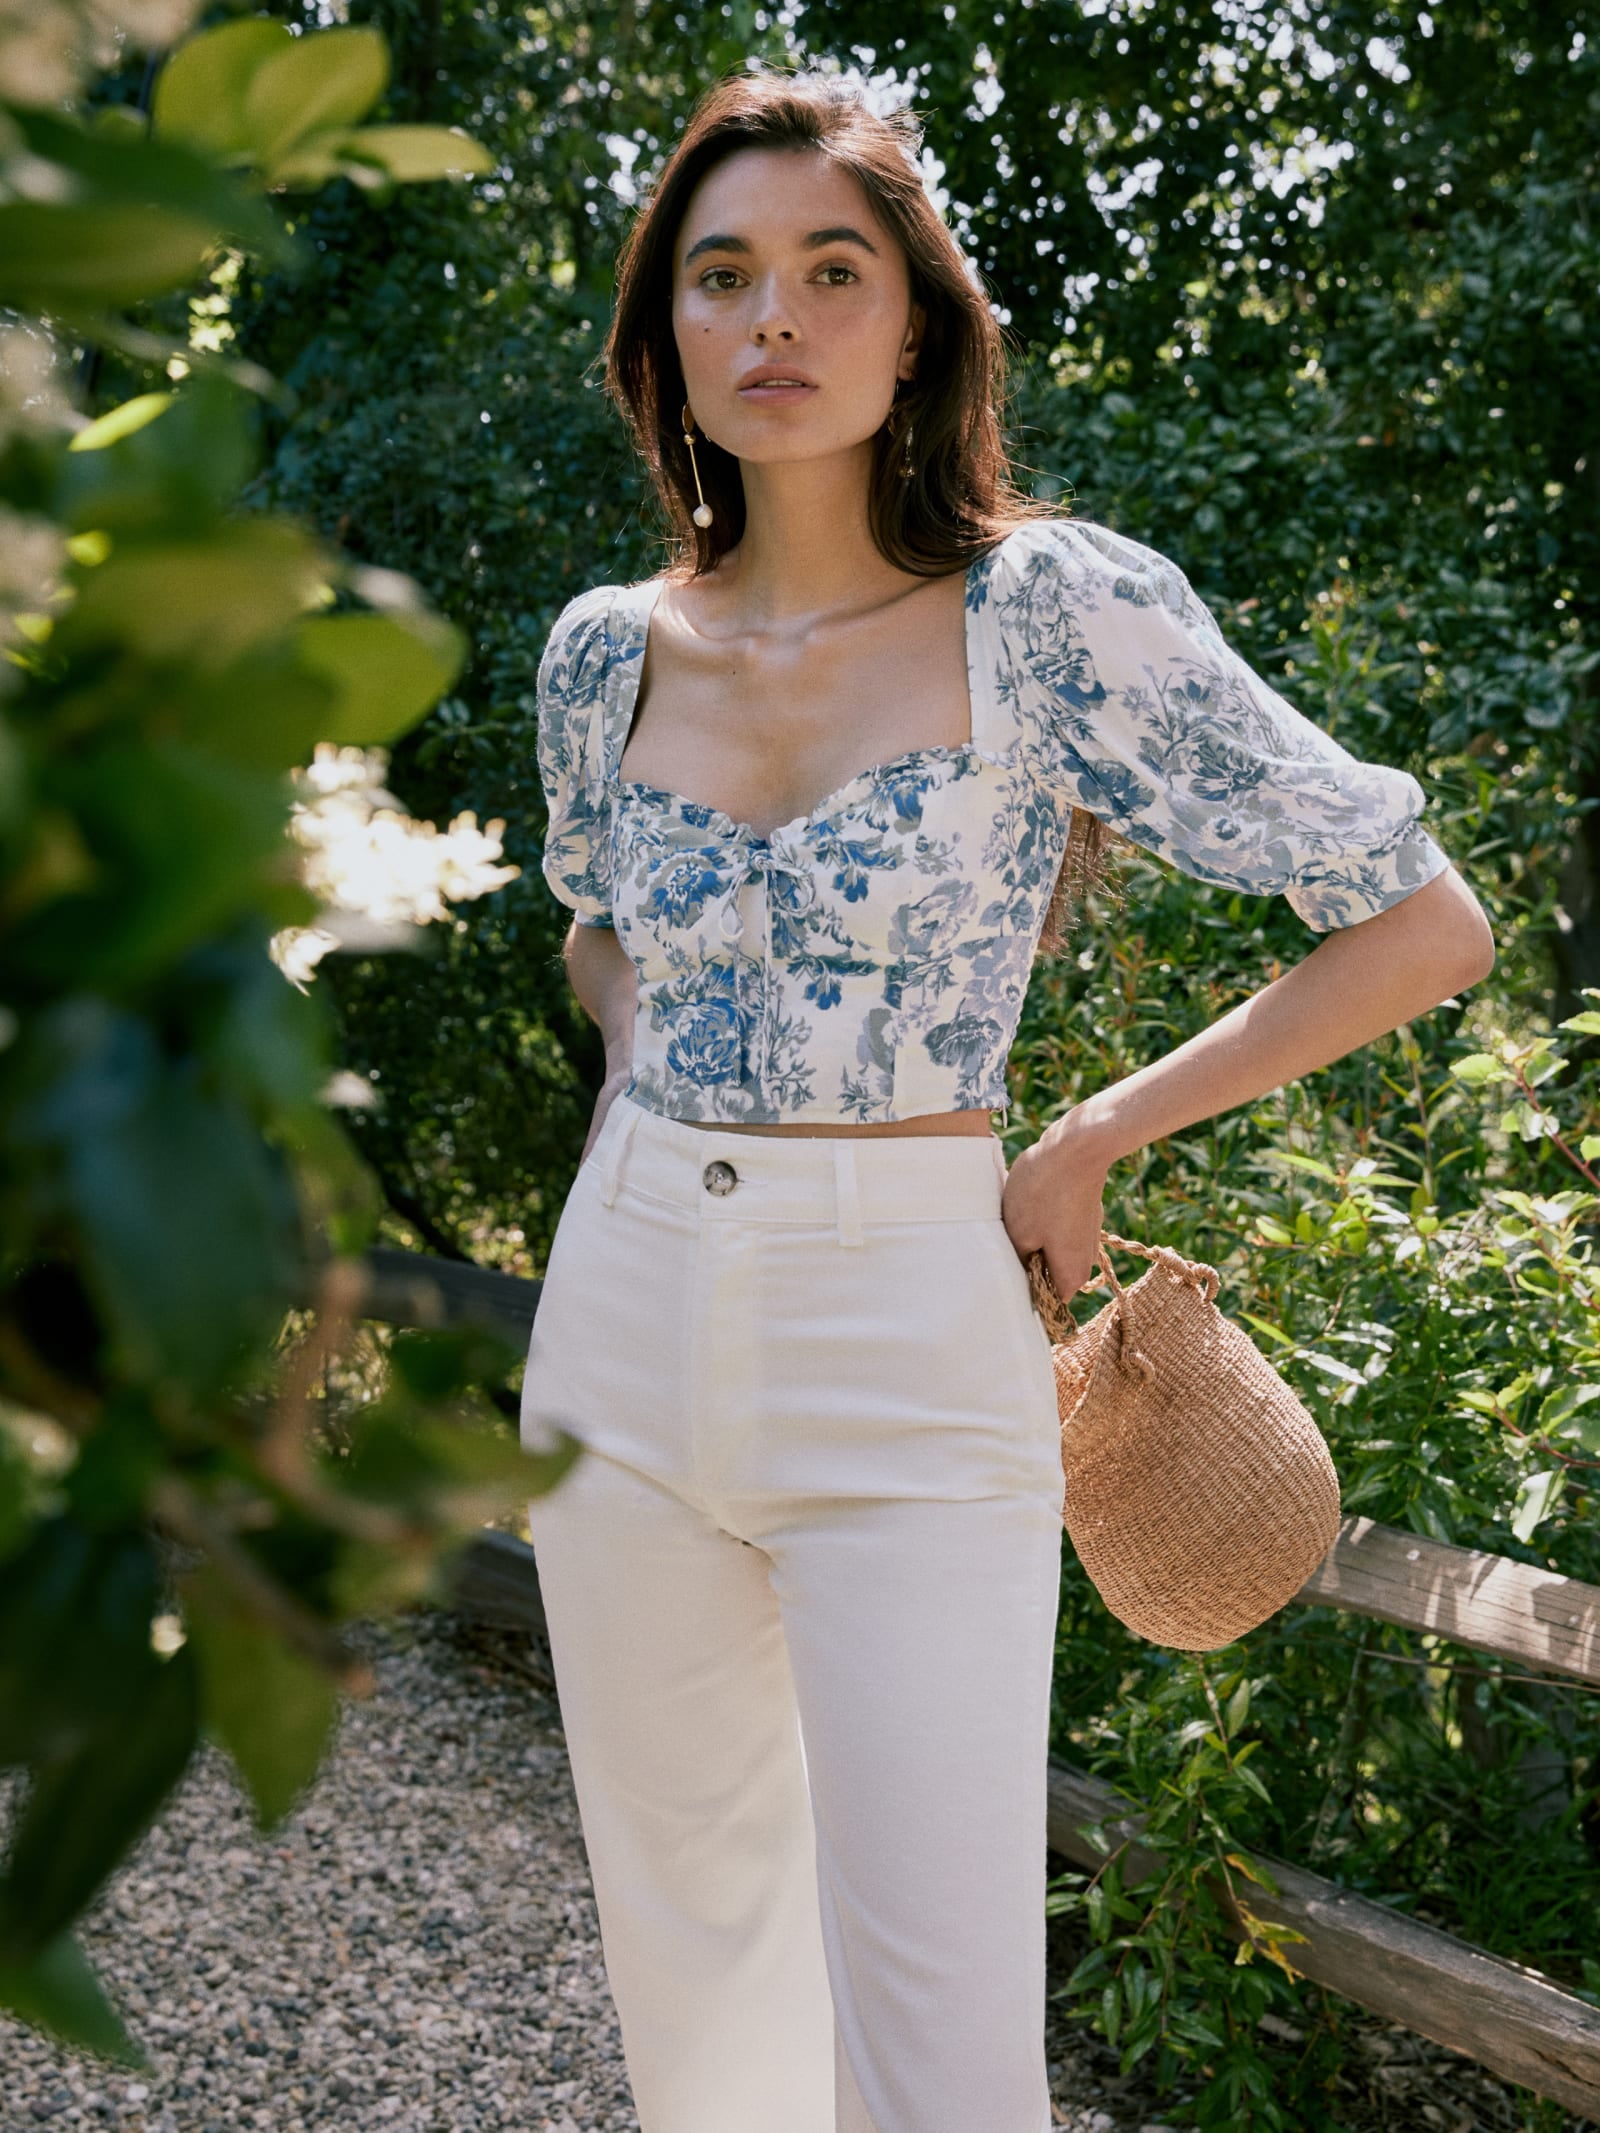 Reformation Luna Top | 21 Travel Tops So Versatile, You Can Wear Them Even Your Trip Is | Photo 16